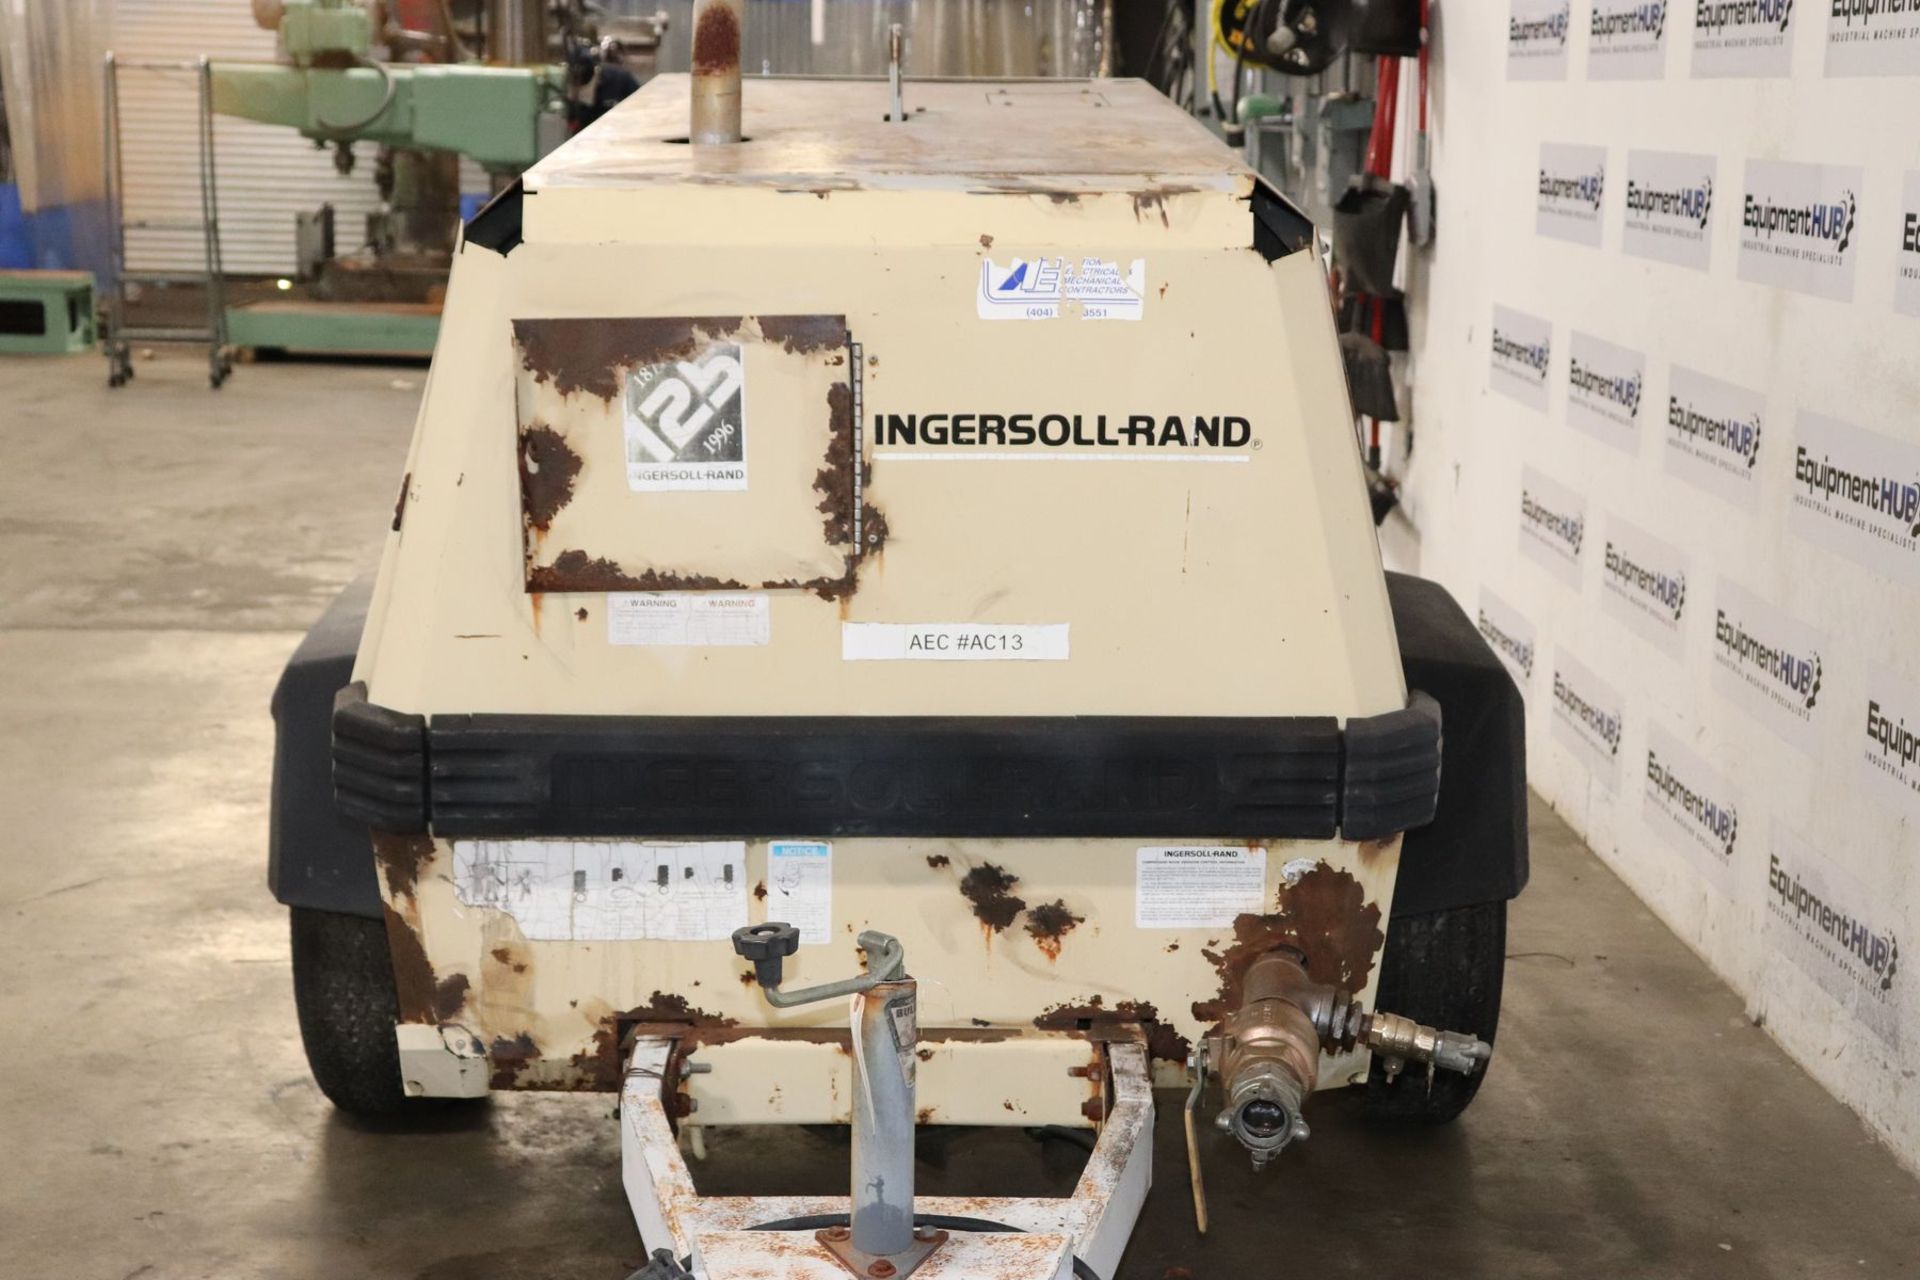 Ingersoll Rand P185WJD 185 CFM Portable Towable Air Compressor - Image 8 of 14